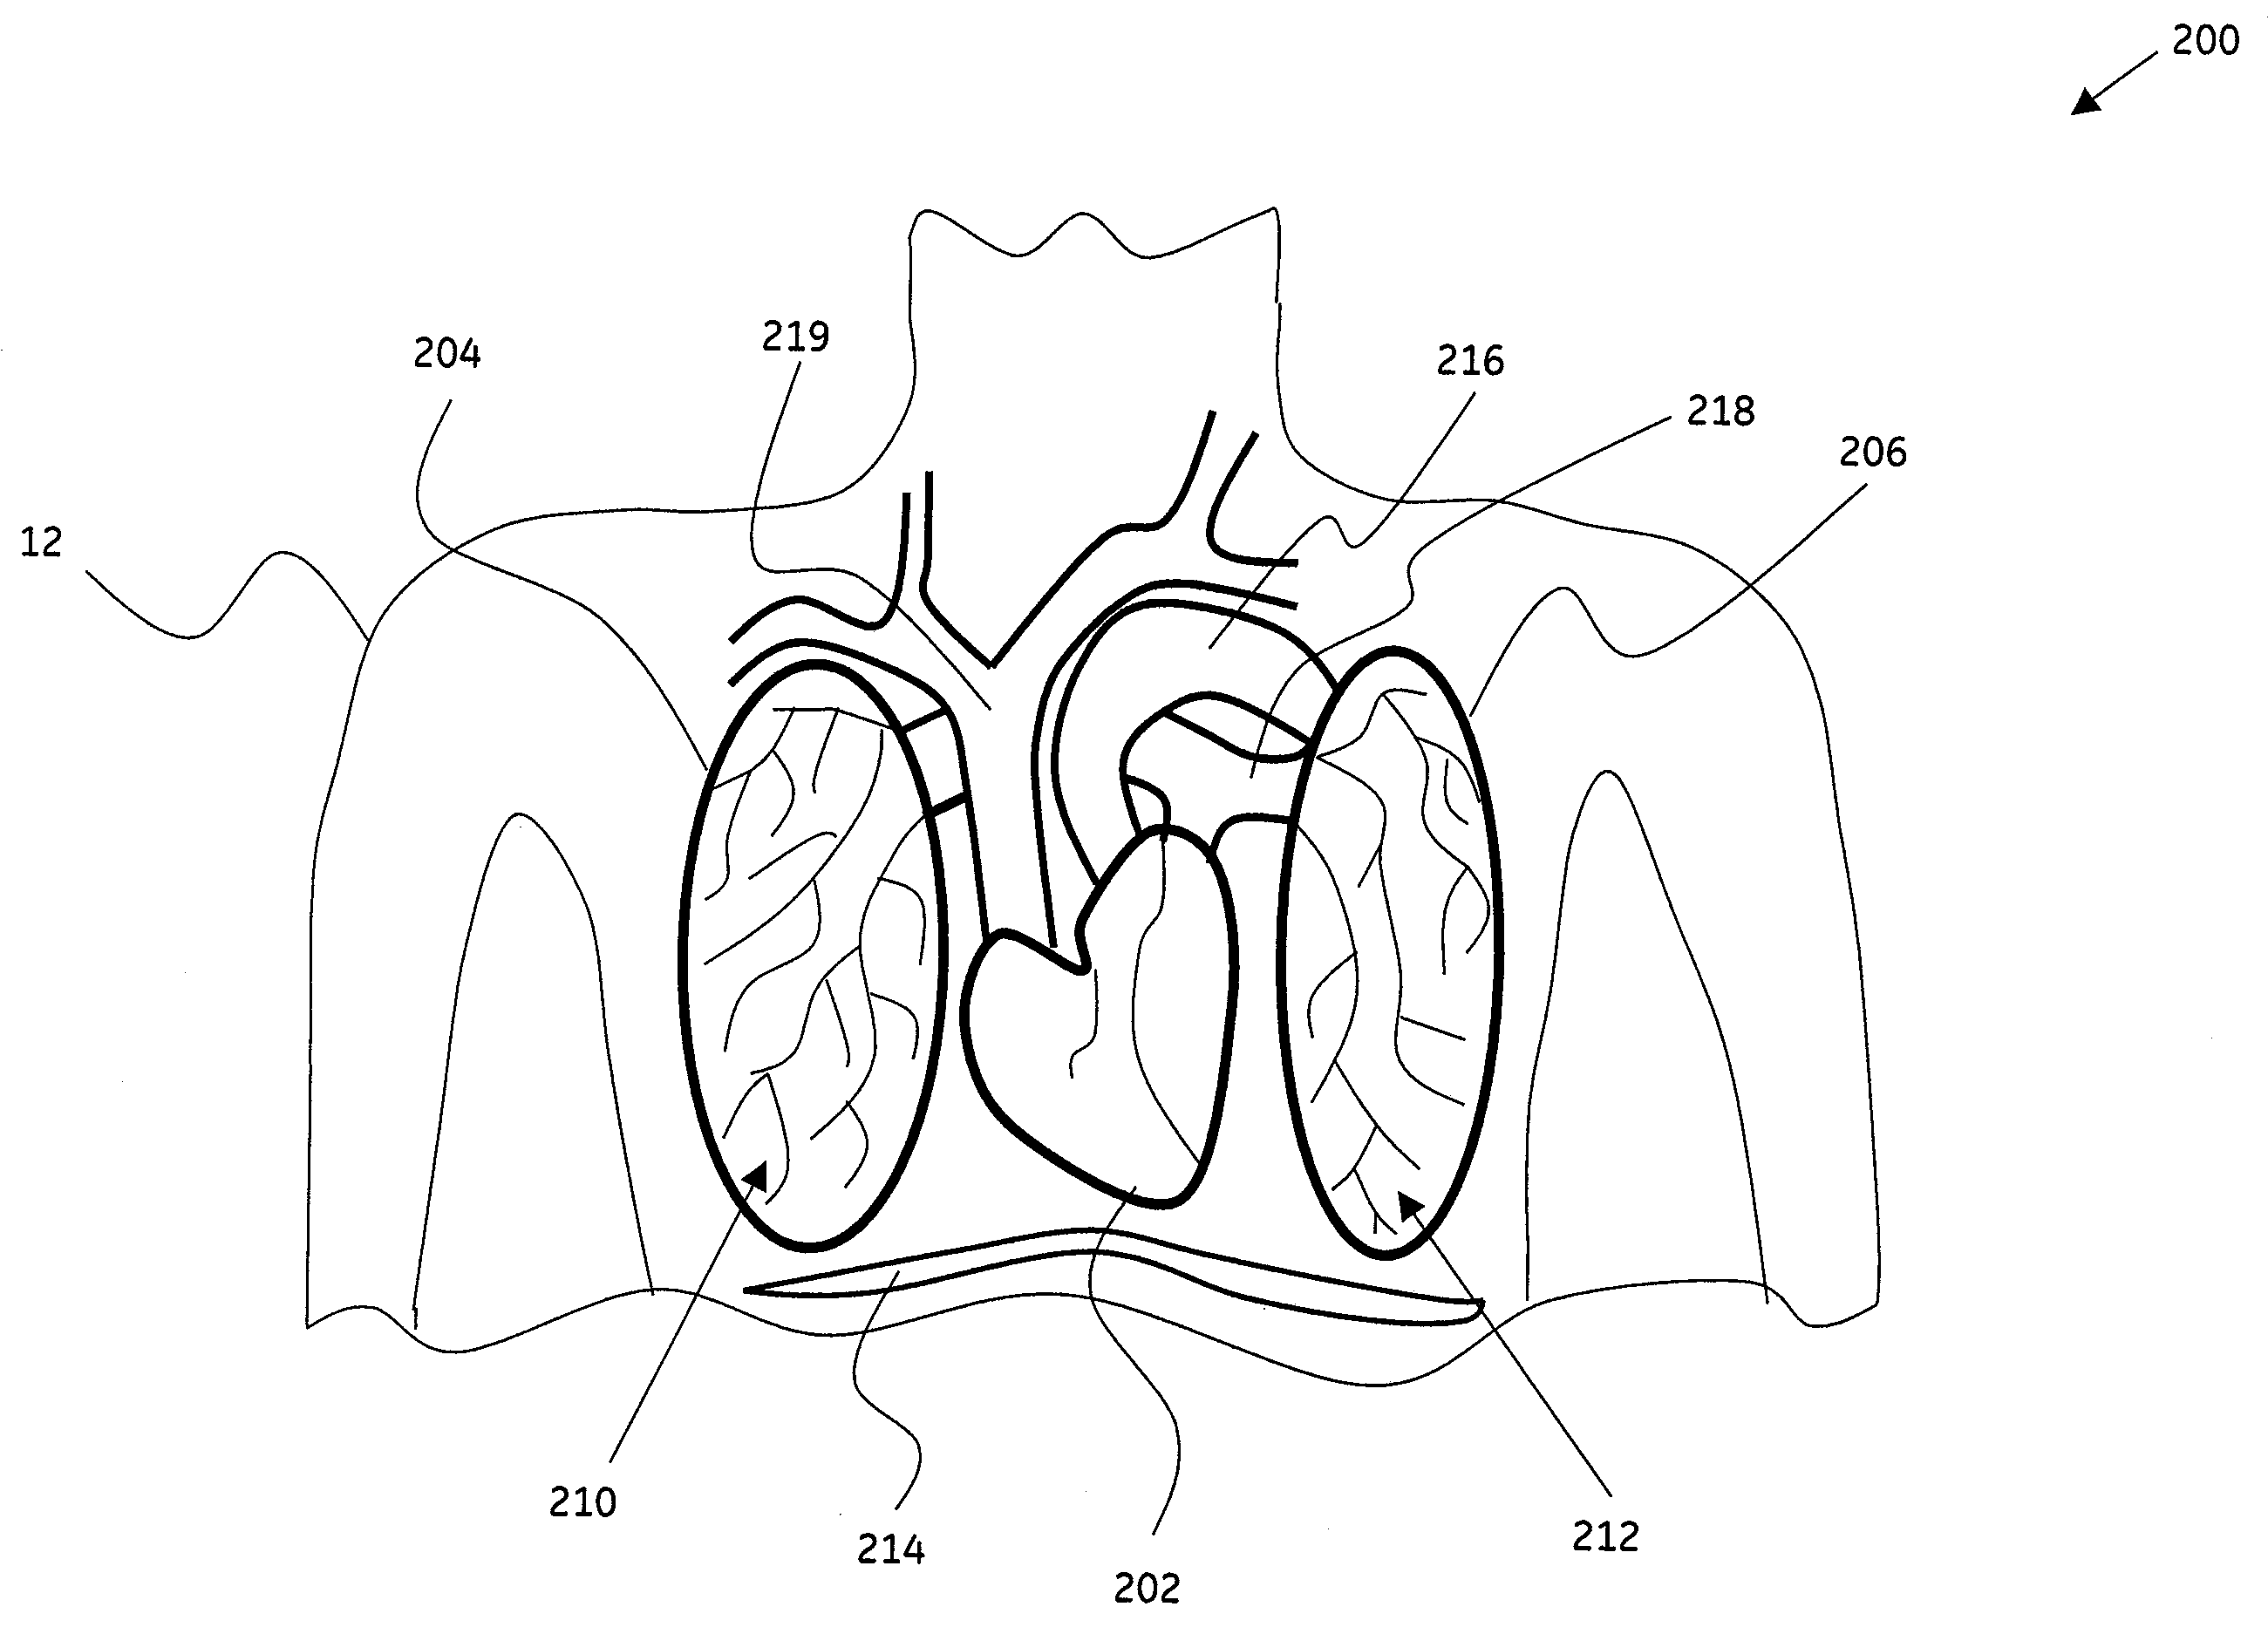 Method and system for detection of obstructions in vasculature